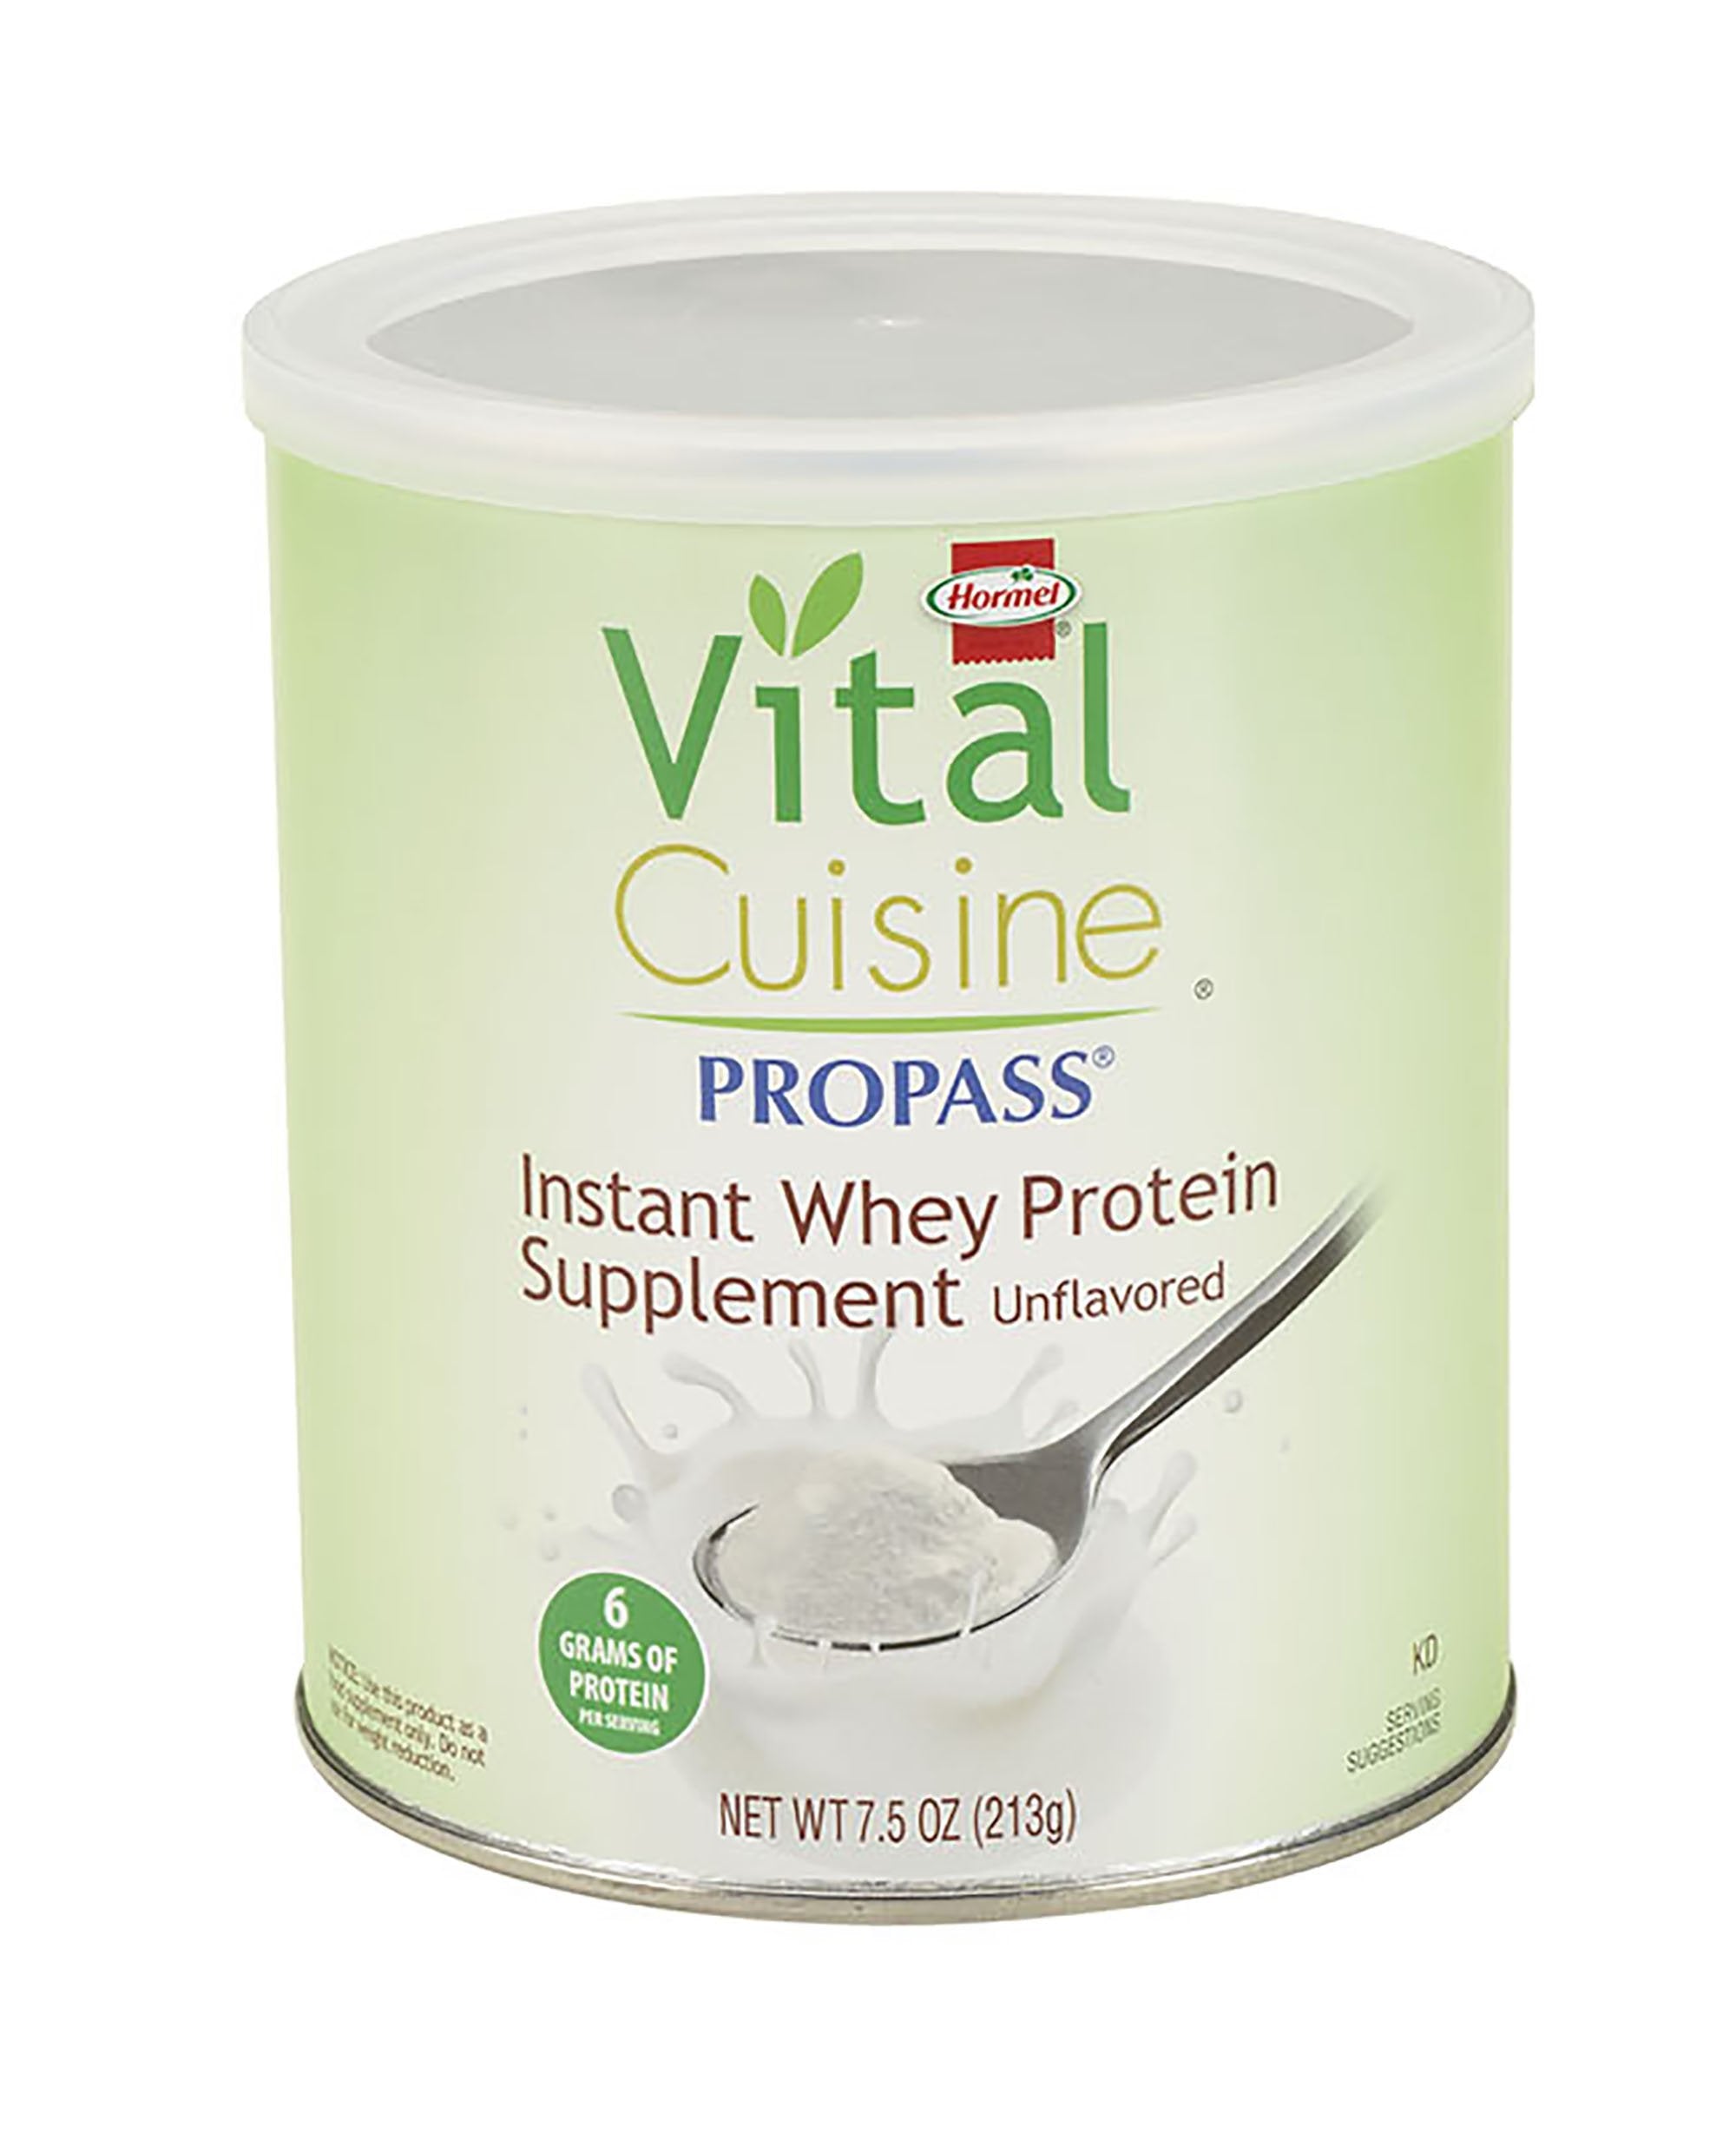 Oral Supplement Hormel Vital Cuisine PROPASS Unflavored Powder 7.5 oz. Can